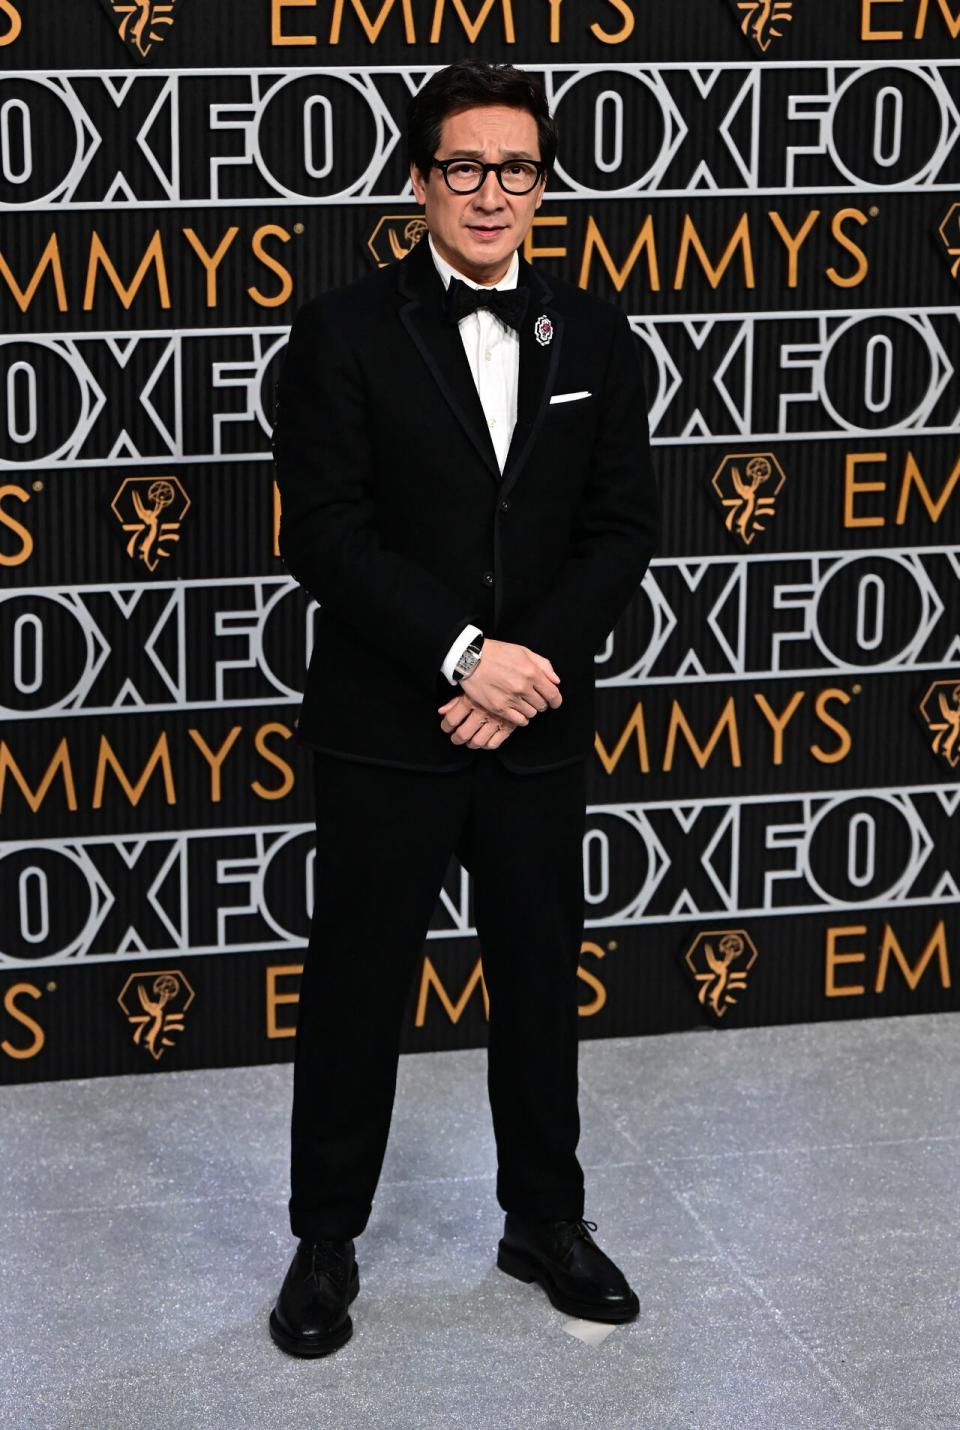 Everything Everywhere All At Once star Ke Huy Quan wears his signature thick-framed glasses and a classic tuxedo with a brooch at the 75th Emmy Awards.